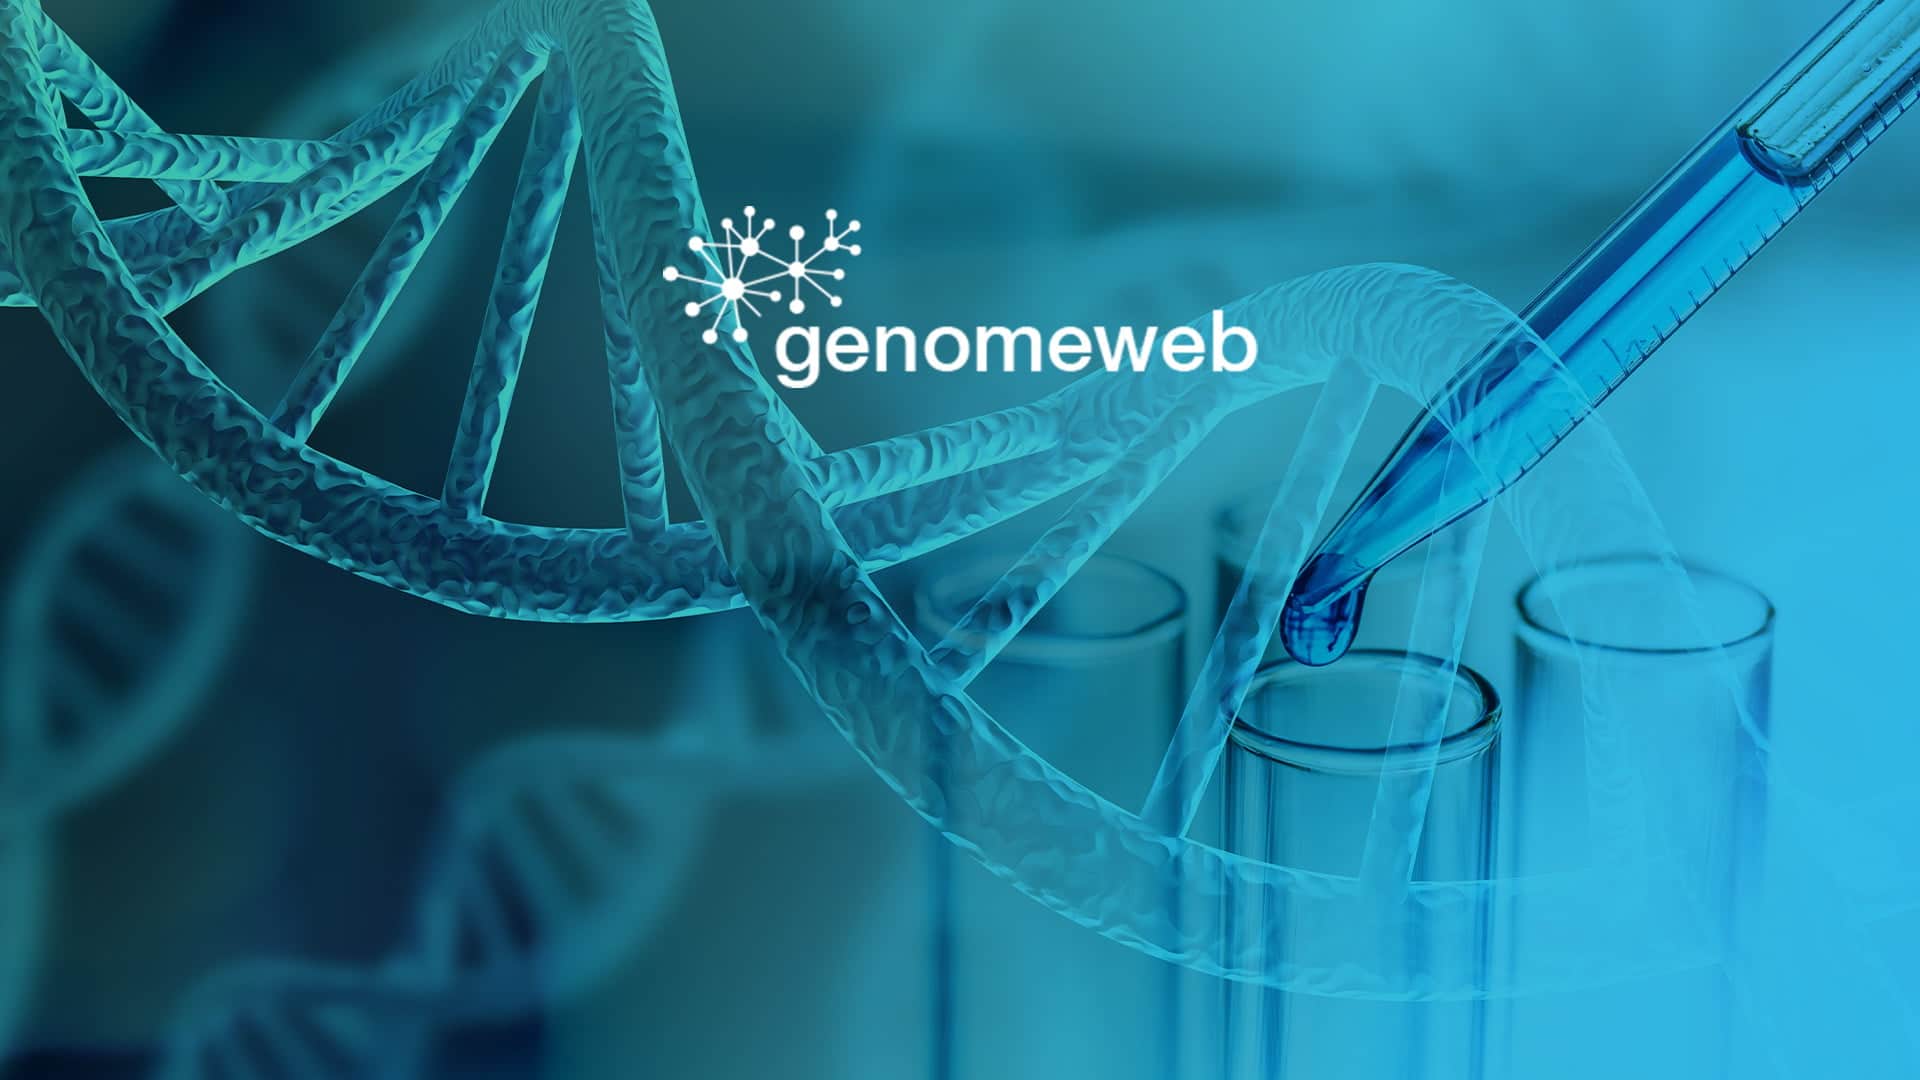 <font color="#4B9CD2"> Genomeweb: </font> Genomill Health Positioning Geno1 Technology to Improve Liquid Biopsy Sequencing